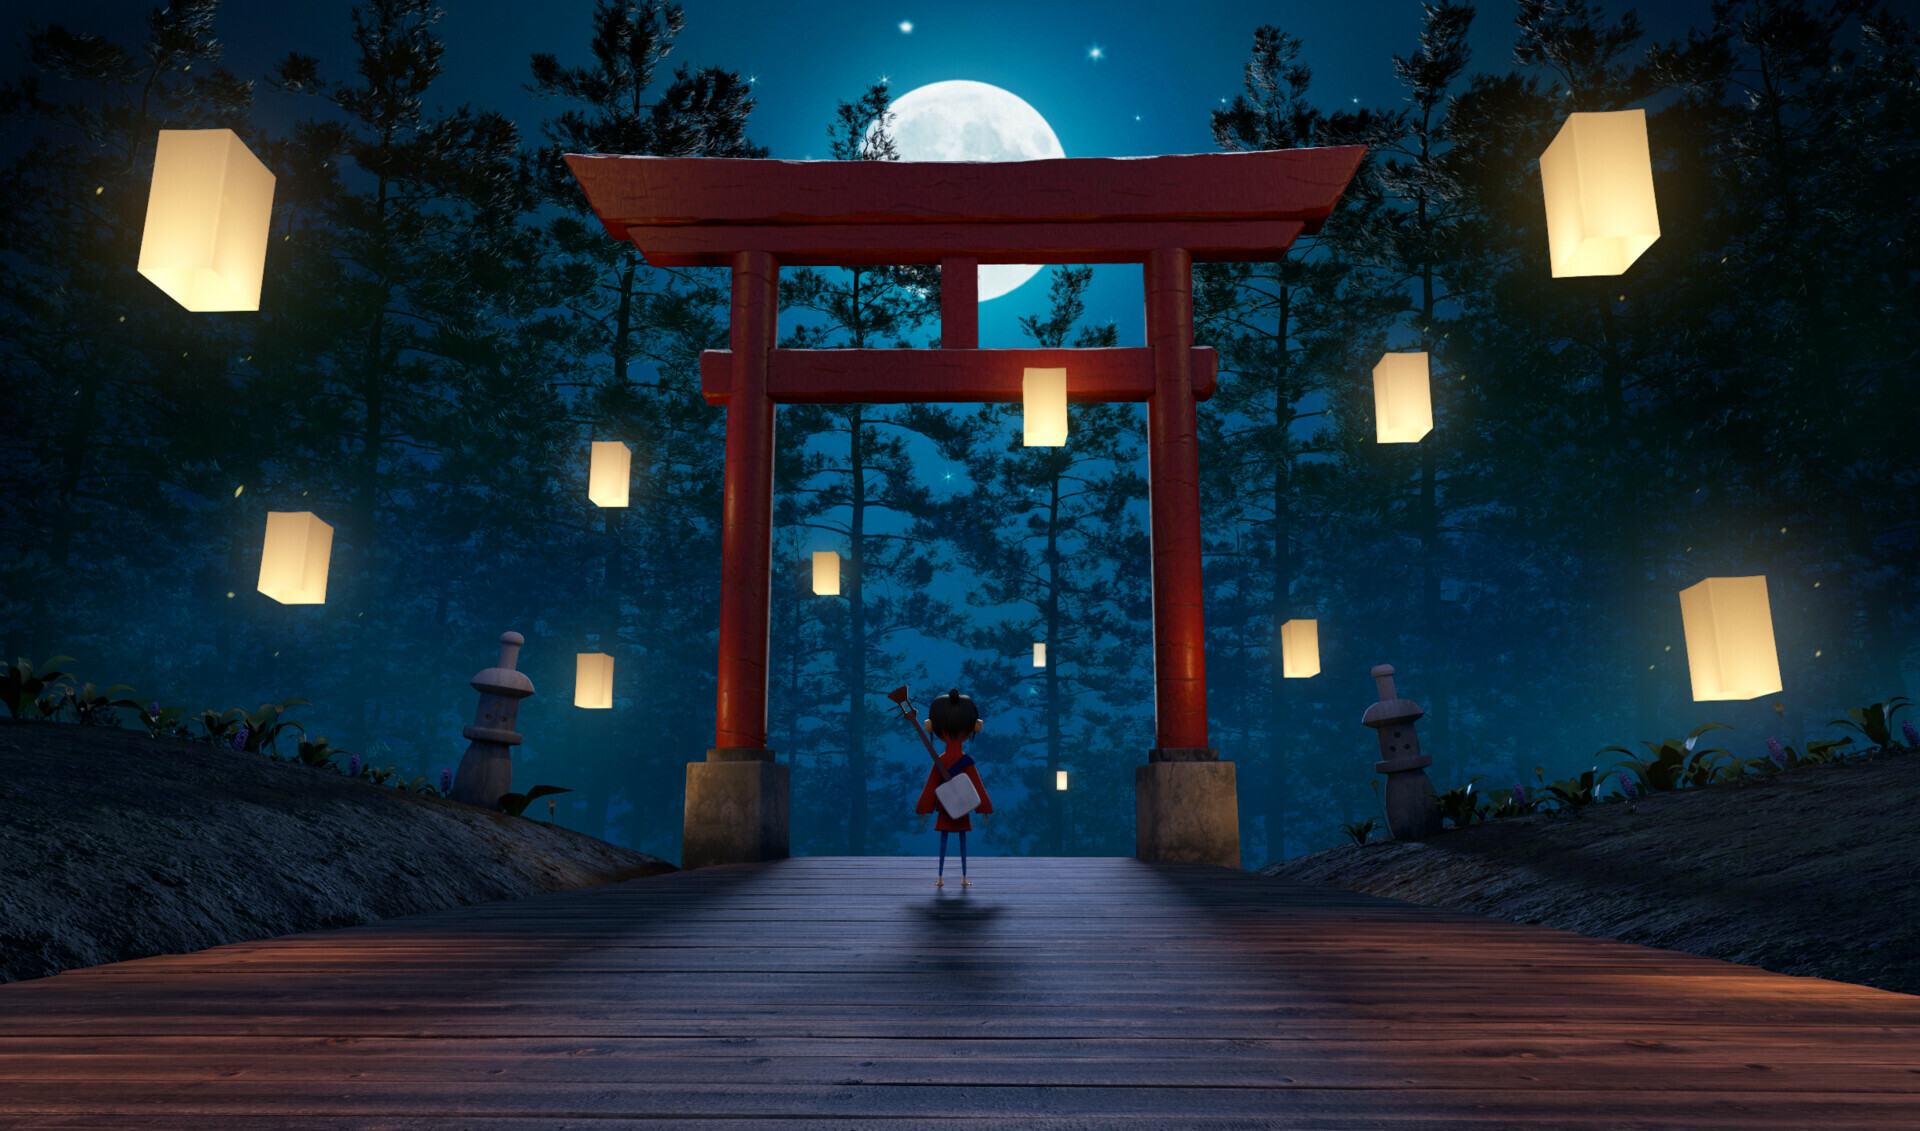 Kubo and the Two Strings: An epic action-adventure set in a fantastical Japan. 1920x1140 HD Background.